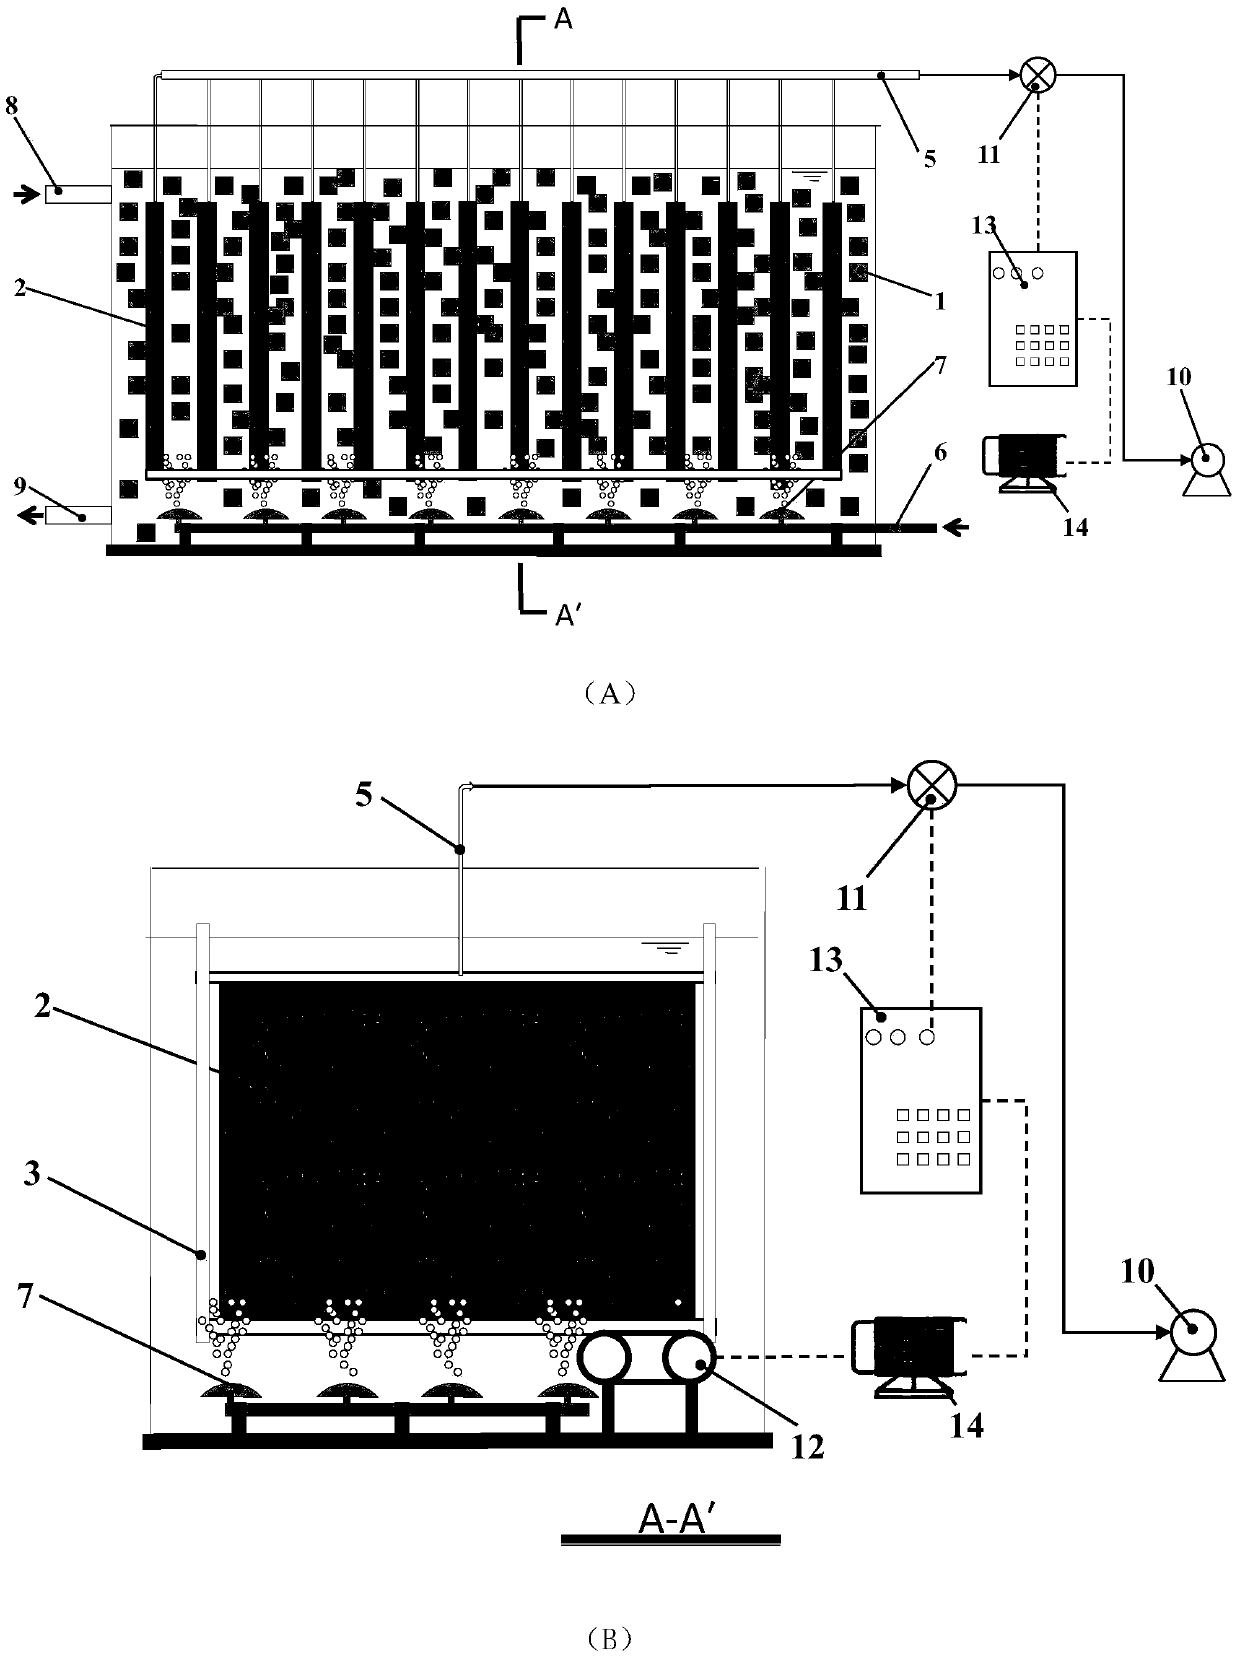 Immersion plate-type membrane bioreactor for improving membrane pollution control and wastewater treatment method using same